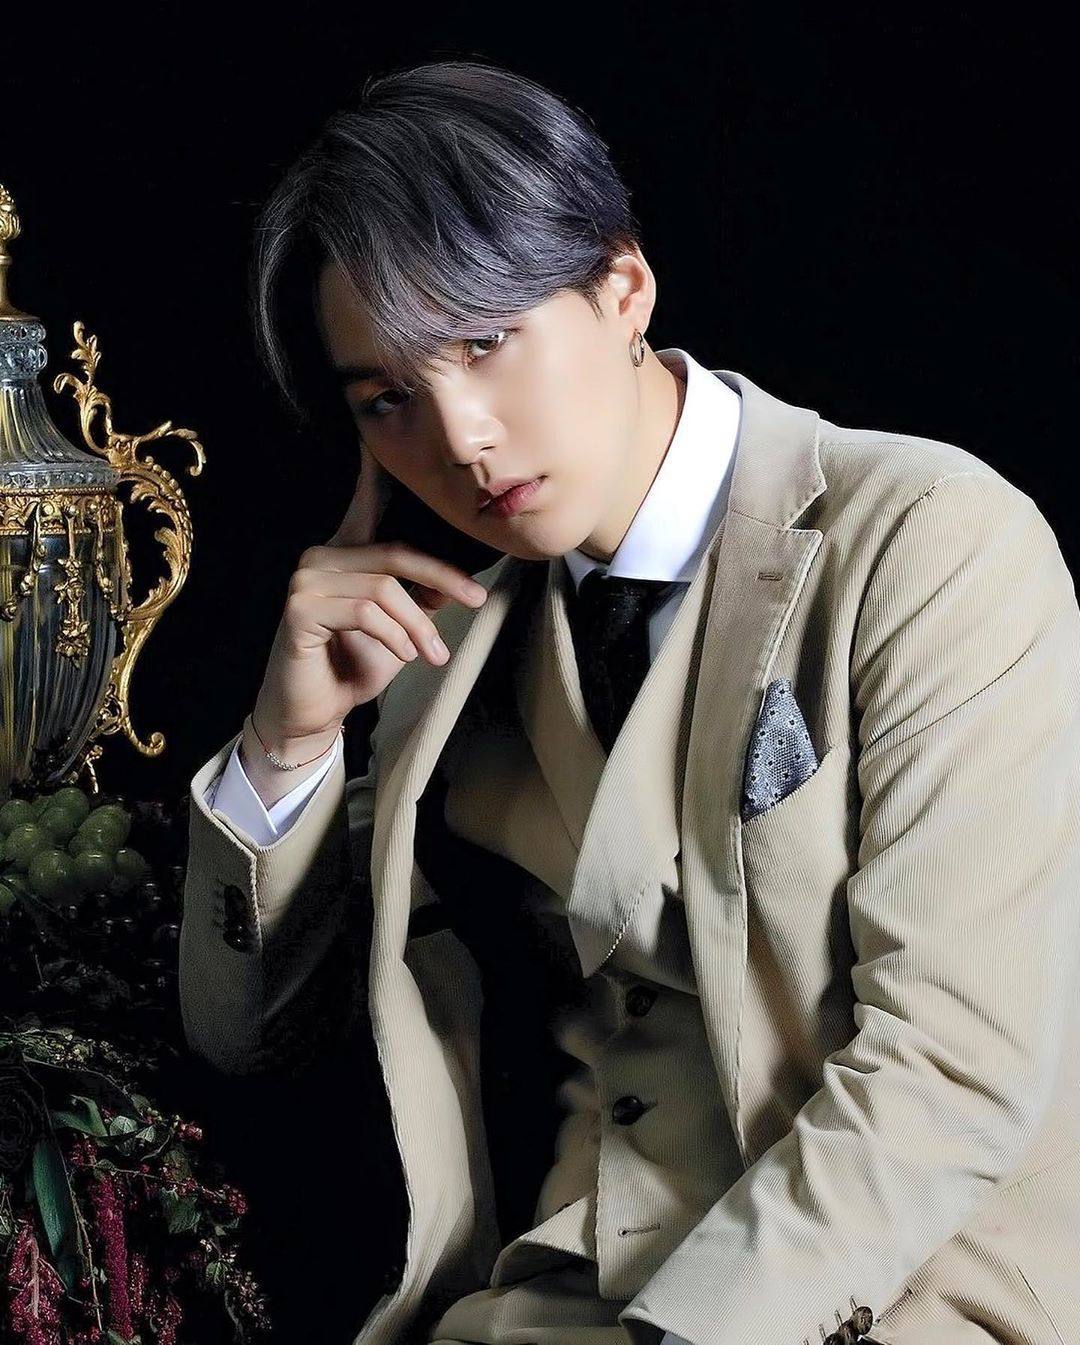 BTS&amp;#39; Suga positive for Covid-19 on Christmas Eve; fans flock to Twitter, Weverse to share well wishes for the K-pop star | South China Morning Post